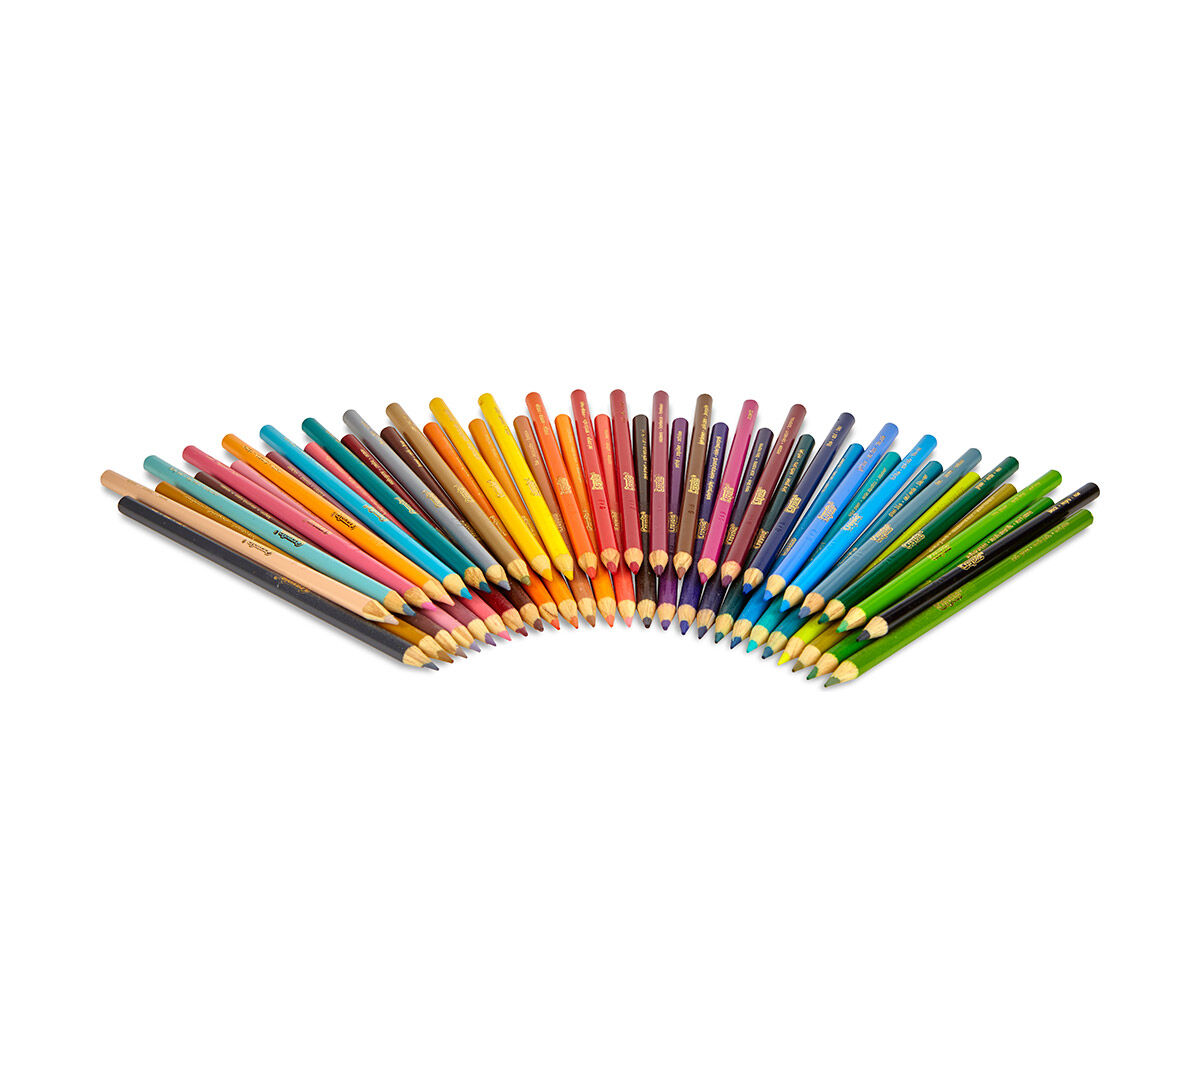 50 Pack of Pre-Sharpened Crayola Pencils Colored Pencils Adult and Kid Coloring 